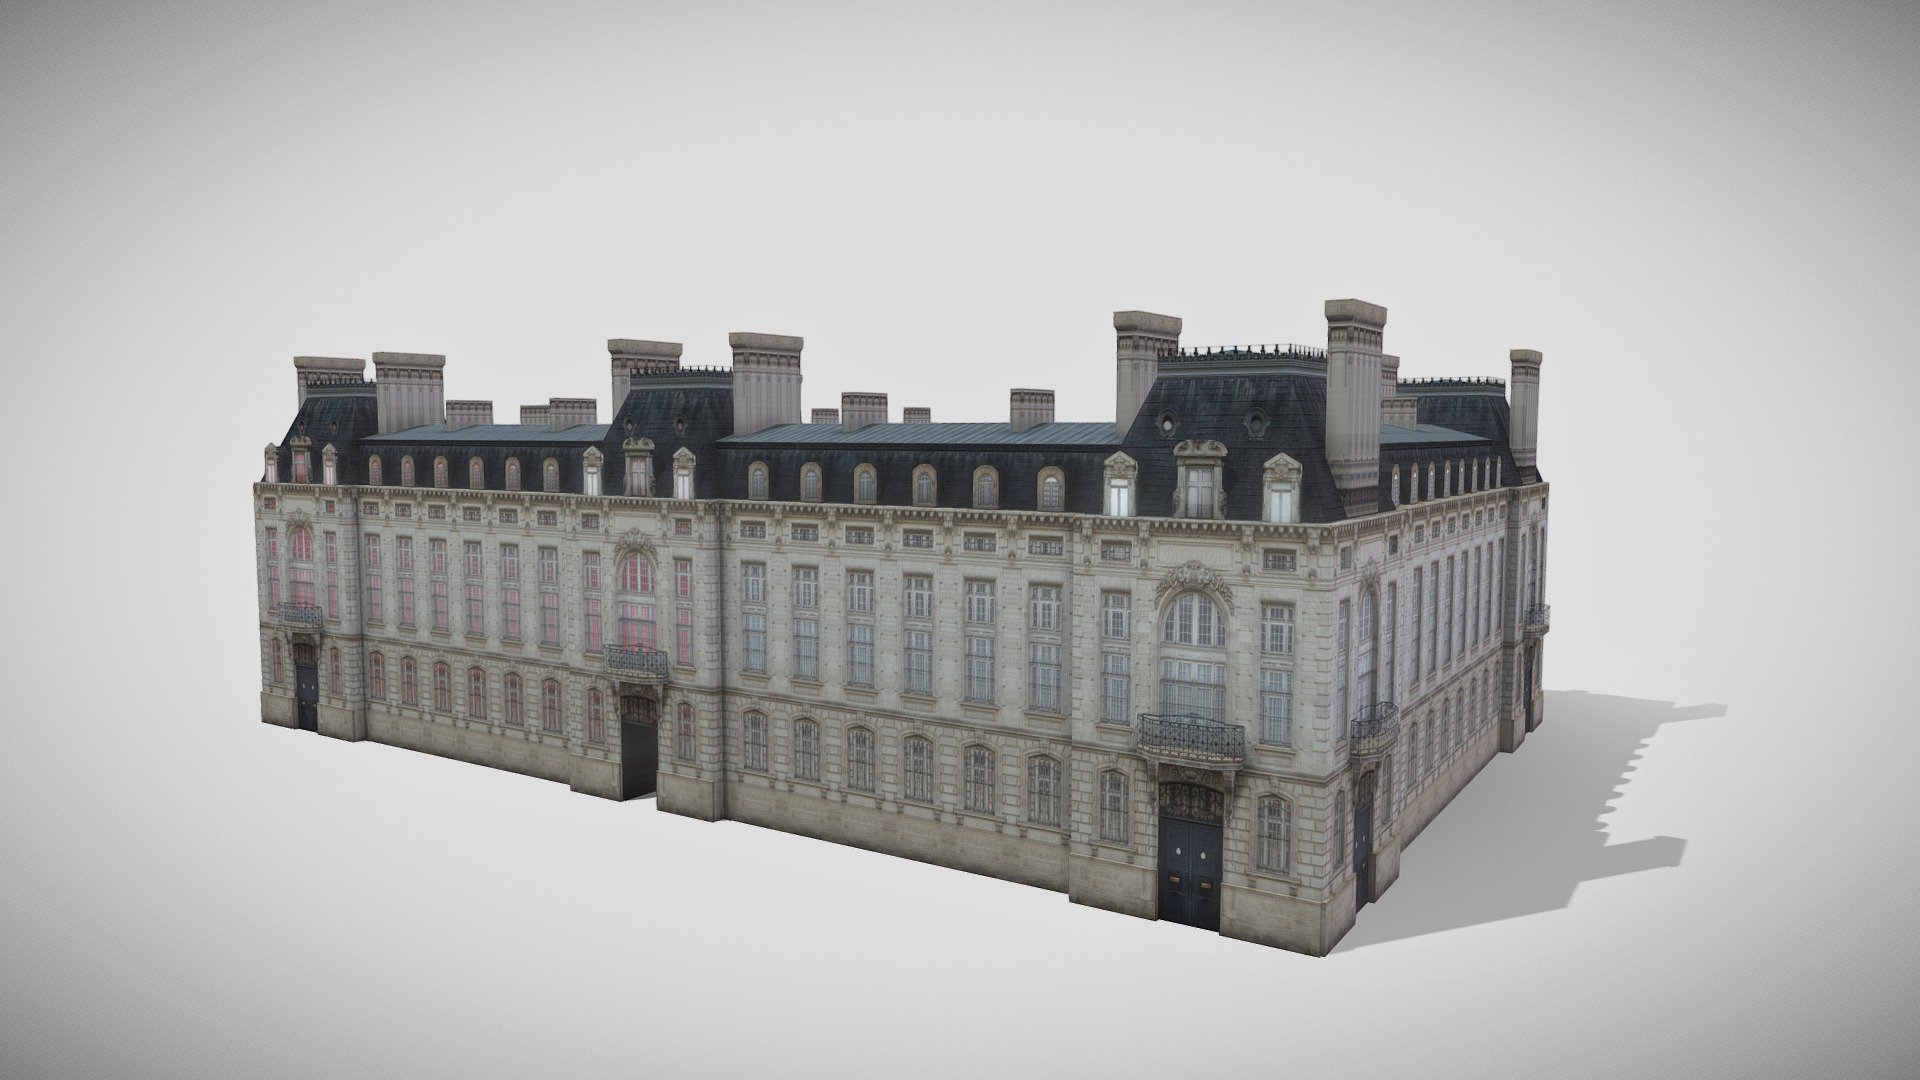 Model released for Cities Skylines: https://steamcommunity.com/sharedfiles/filedetails/?id=2119893015&amp;searchtext= - Paris Police Station - Download Free 3D model by aitortilla01 3d model